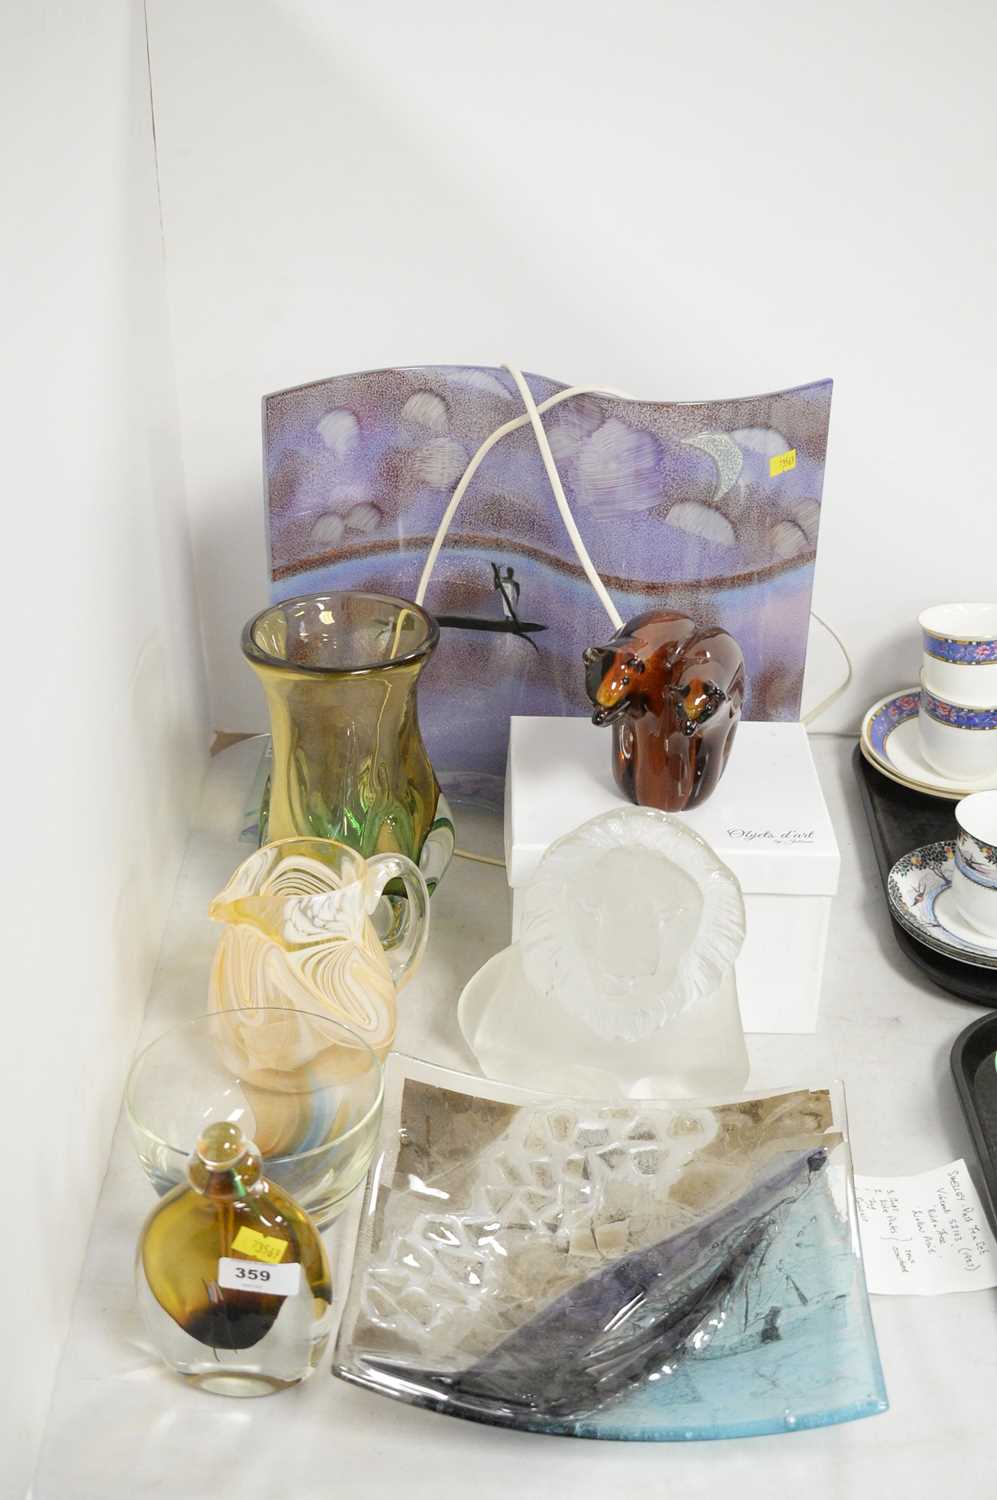 A selection of art glass wares.